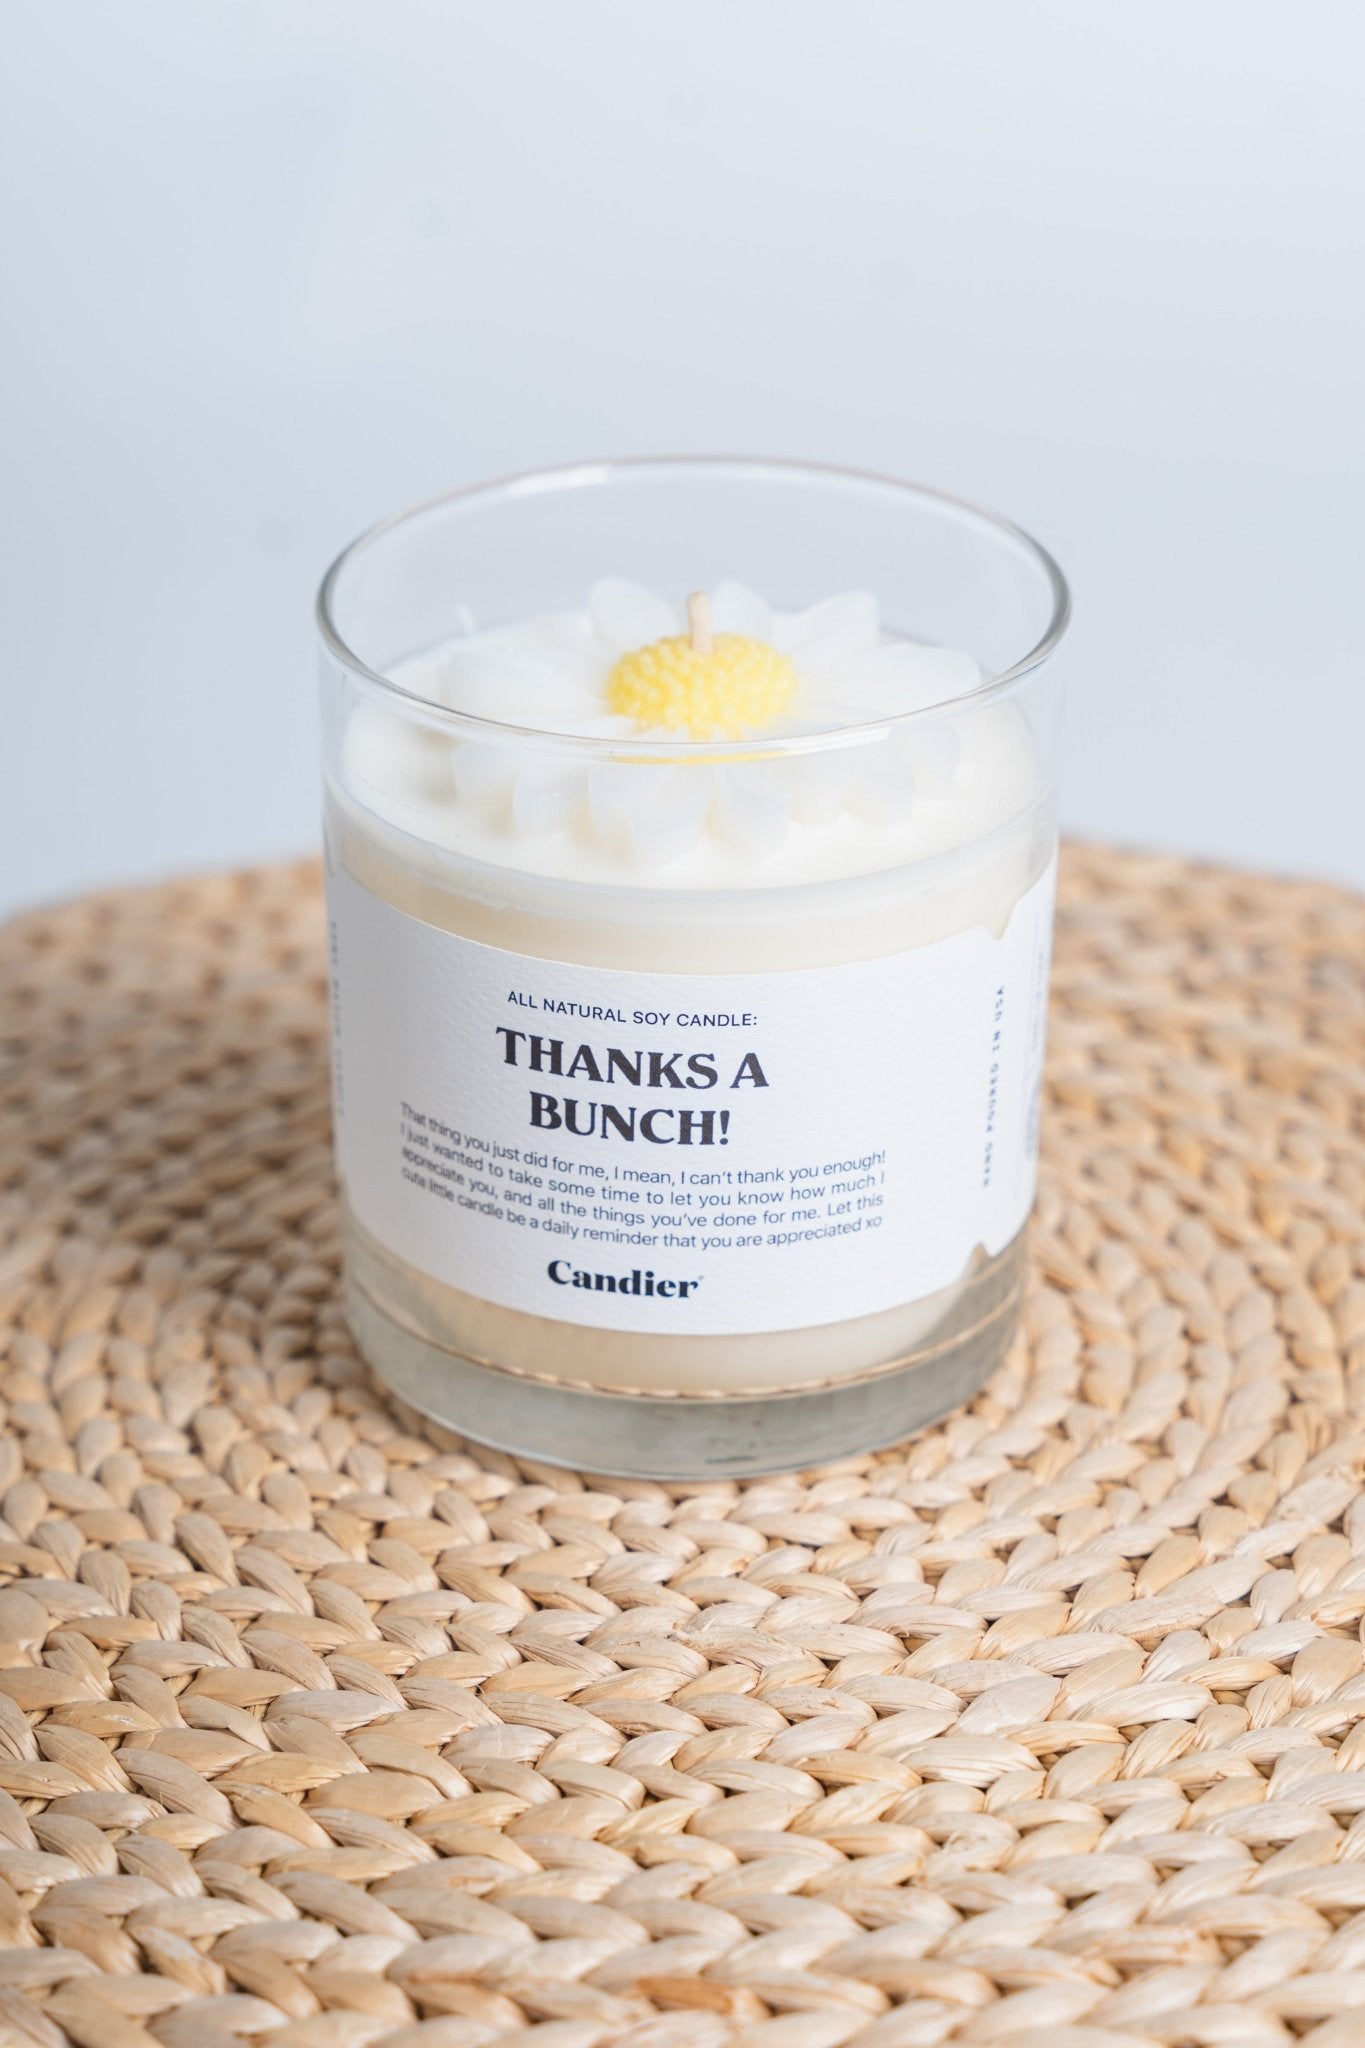 Thanks a bunch candle 9 oz - Trendy Candles and Scents at Lush Fashion Lounge Boutique in Oklahoma City